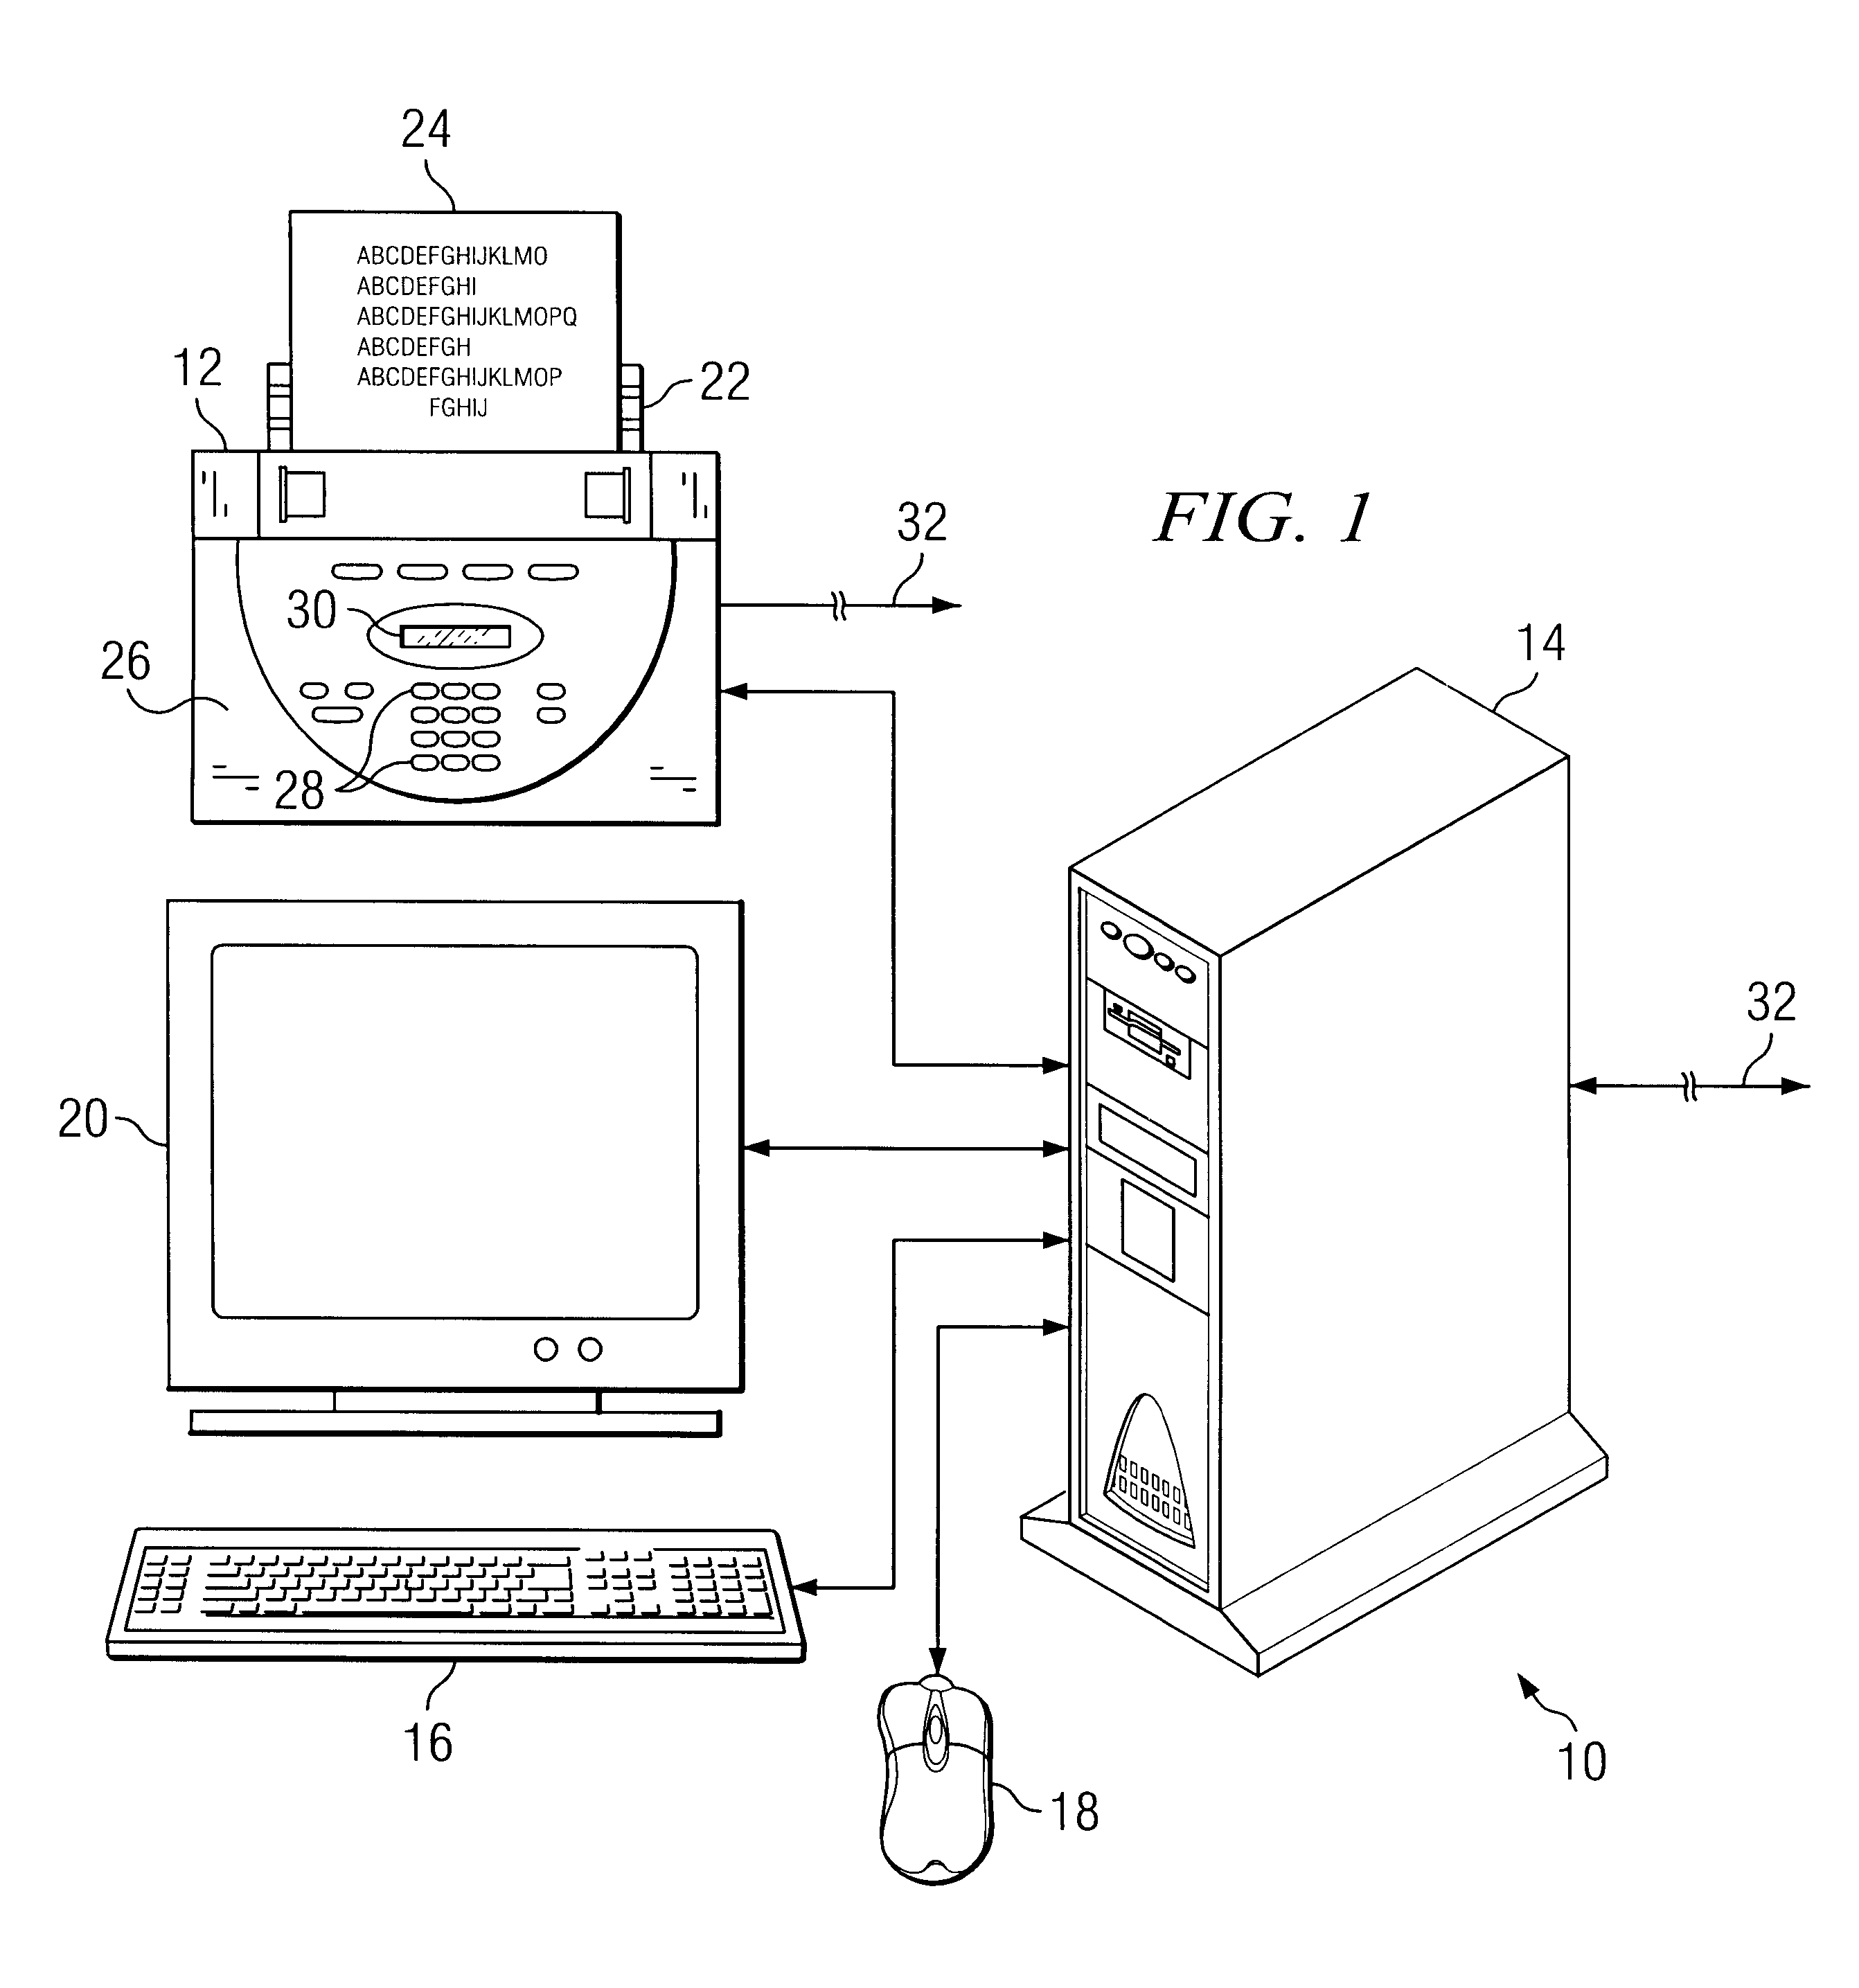 Method and apparatus for controlling a scanning device